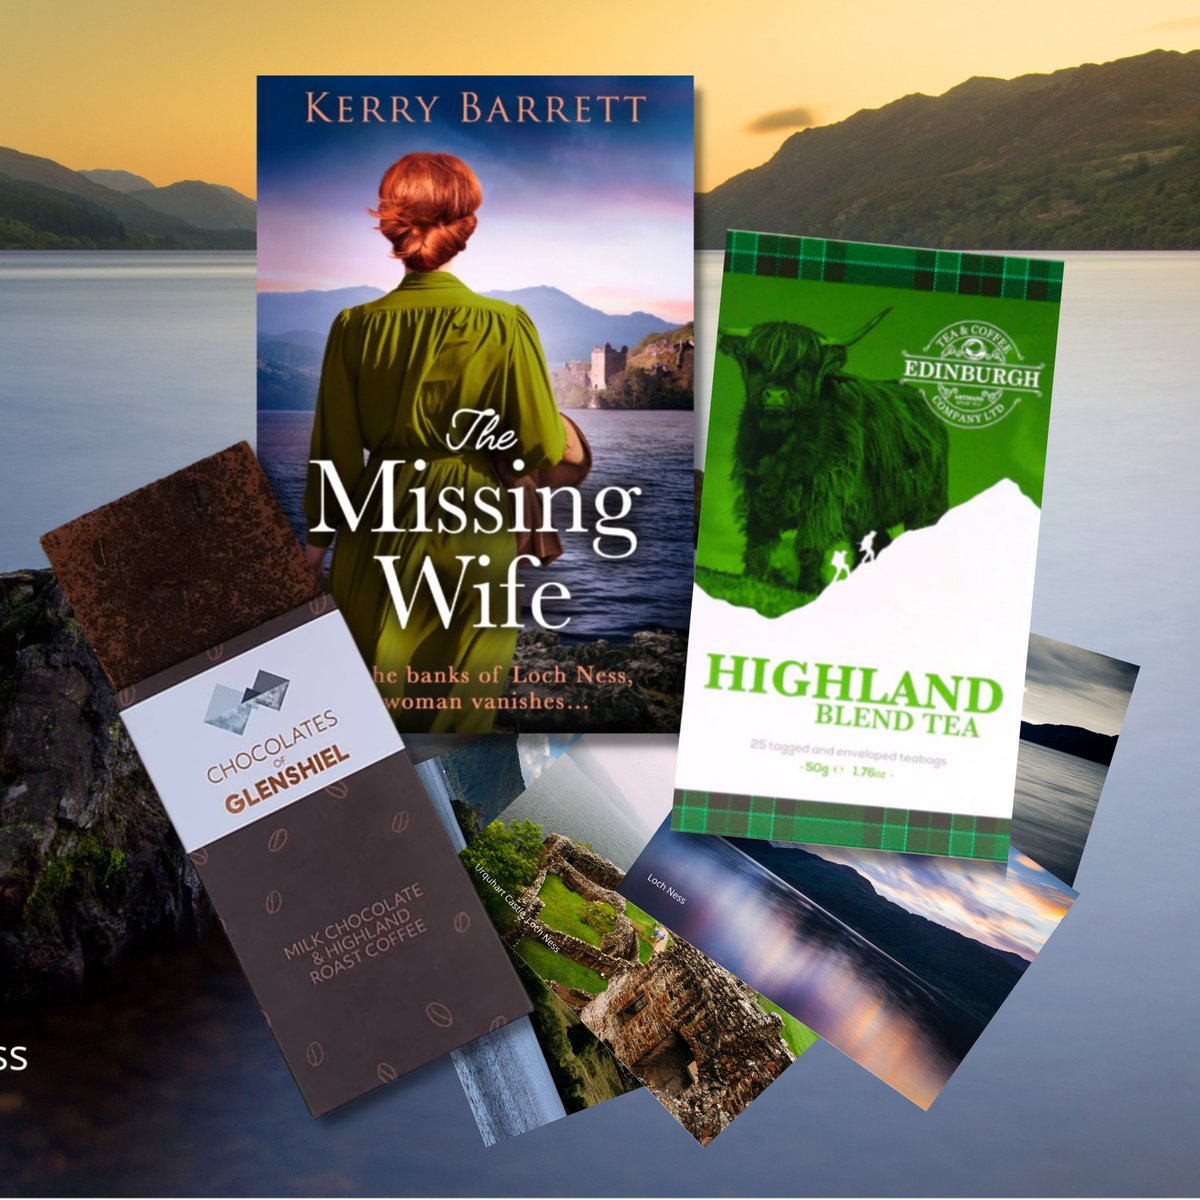 In case you missed it:
The Missing Wife Scottish box with tea and chocolate now available on the website.
#scotland #scotlandexplore #scottish #scottishhighlands #lochness #books #subscriptionbox #travel #readingcommunity #reading #giftideas #giftsforher #booksfromscotland #loch